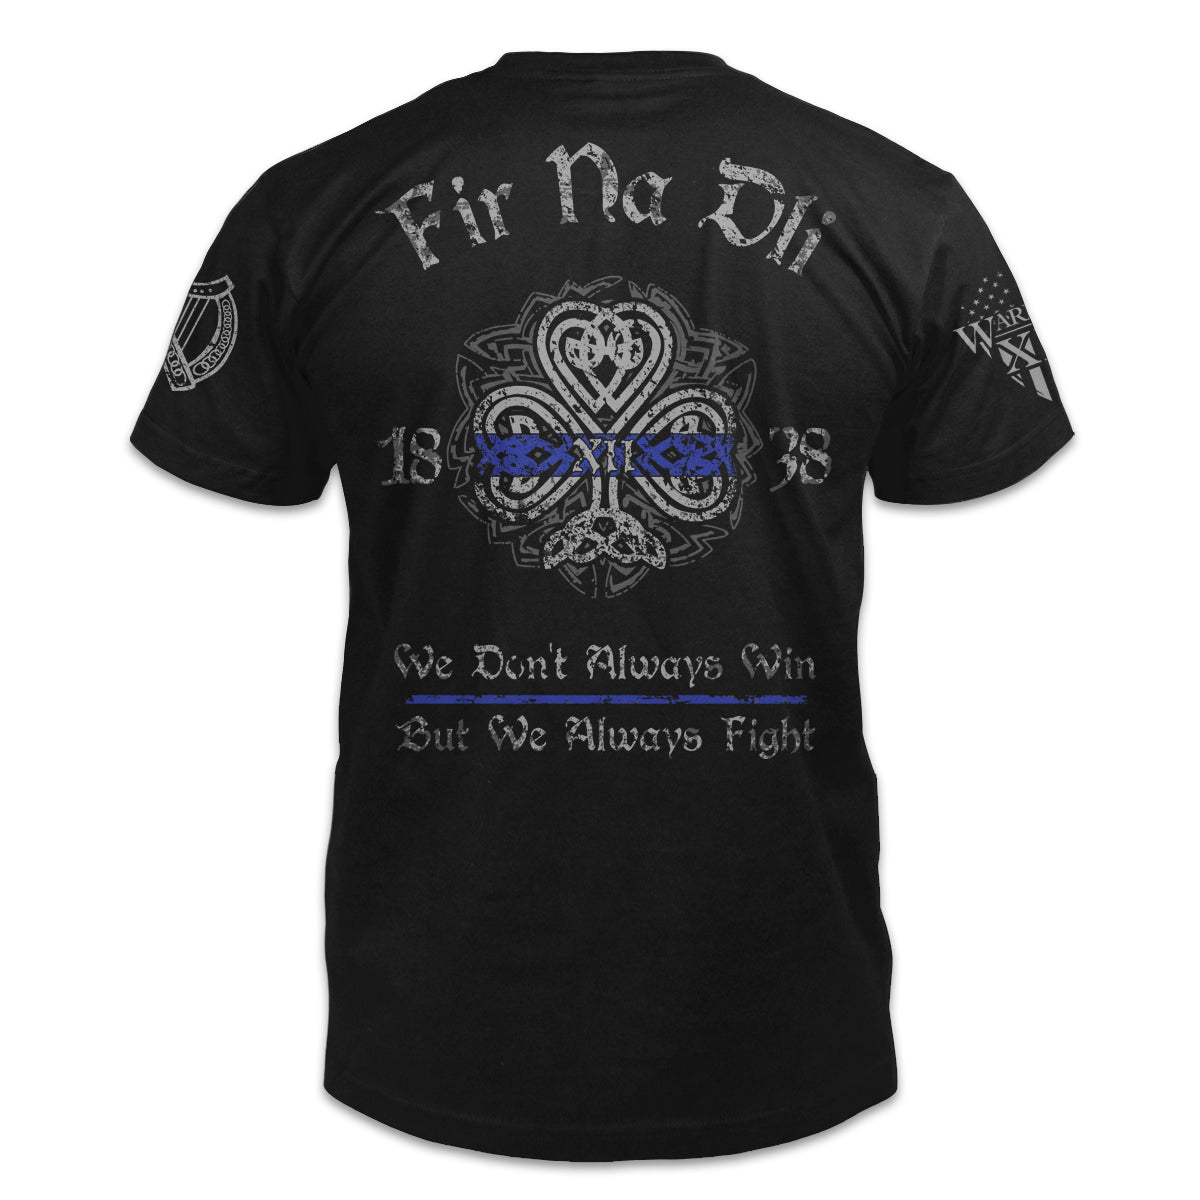 A black t-shirt paying tribute to history and traditions of Irish American Law Enforcement and showing true Celtic Pride. Fir Na Dli, meaning, men of law‚ in Gaelic, is written across the back of the shirt.